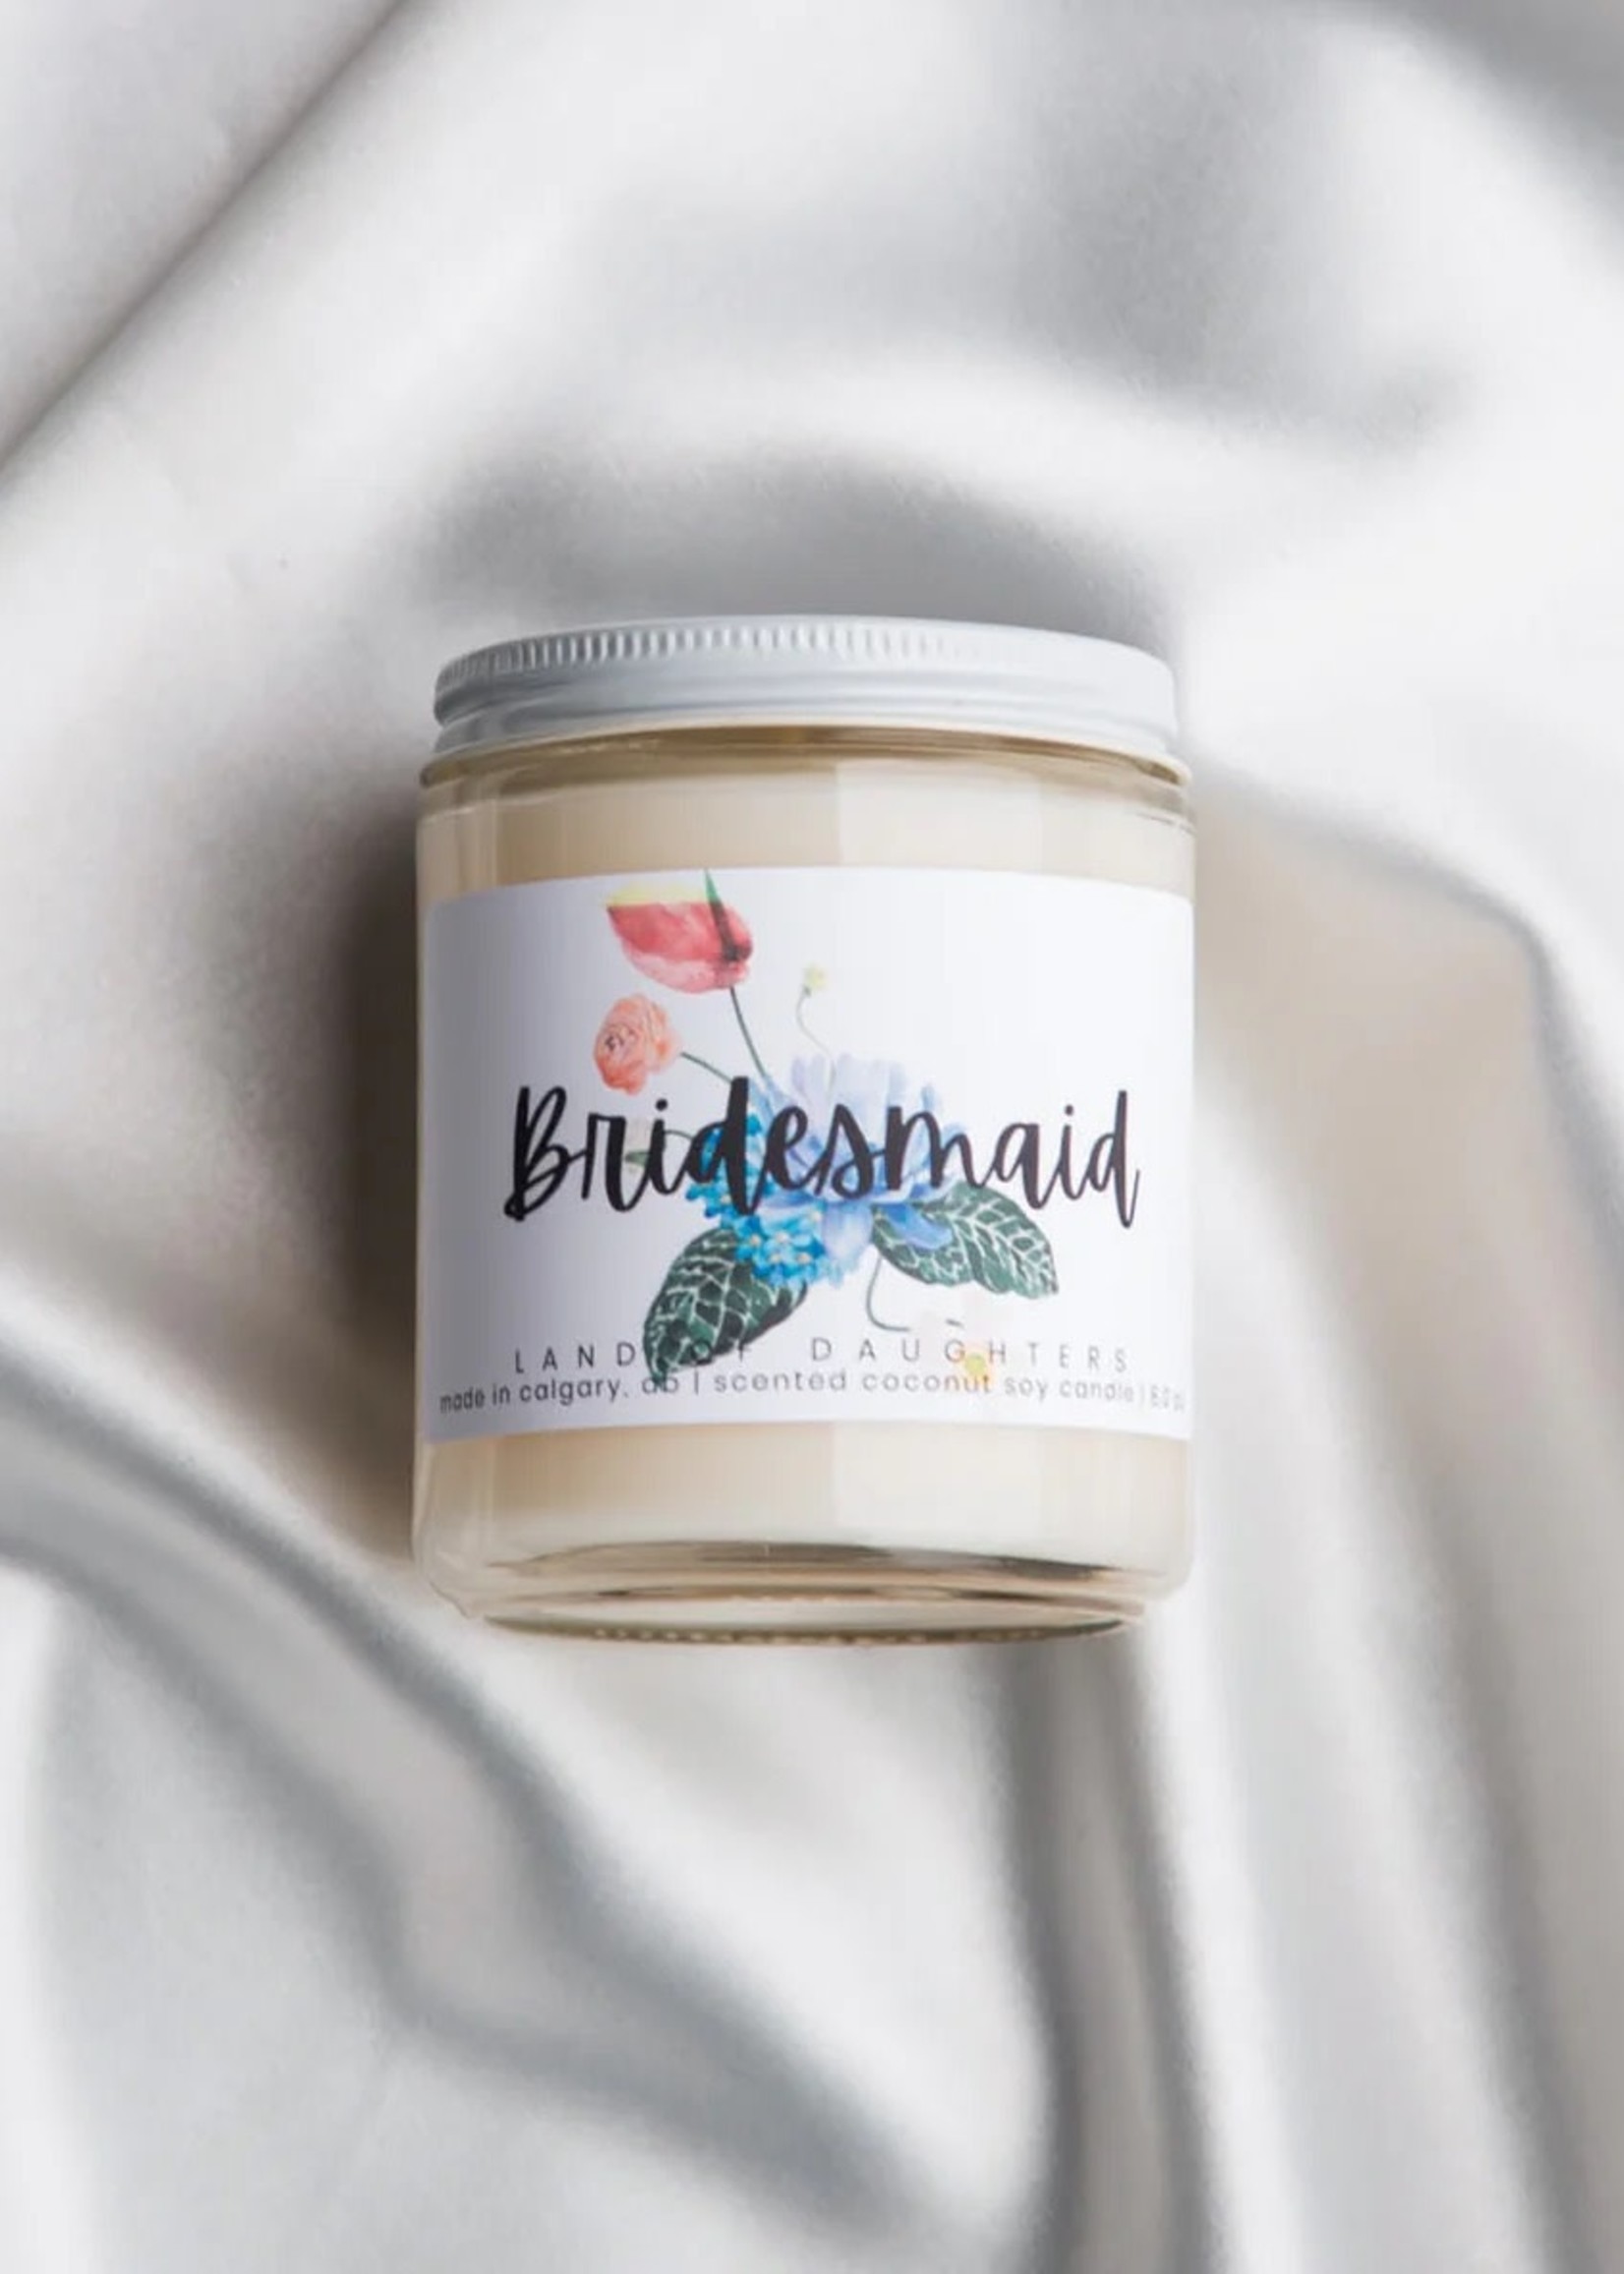 LAND of DAUGHTERS Bridesmaid Candle Desert Blossom